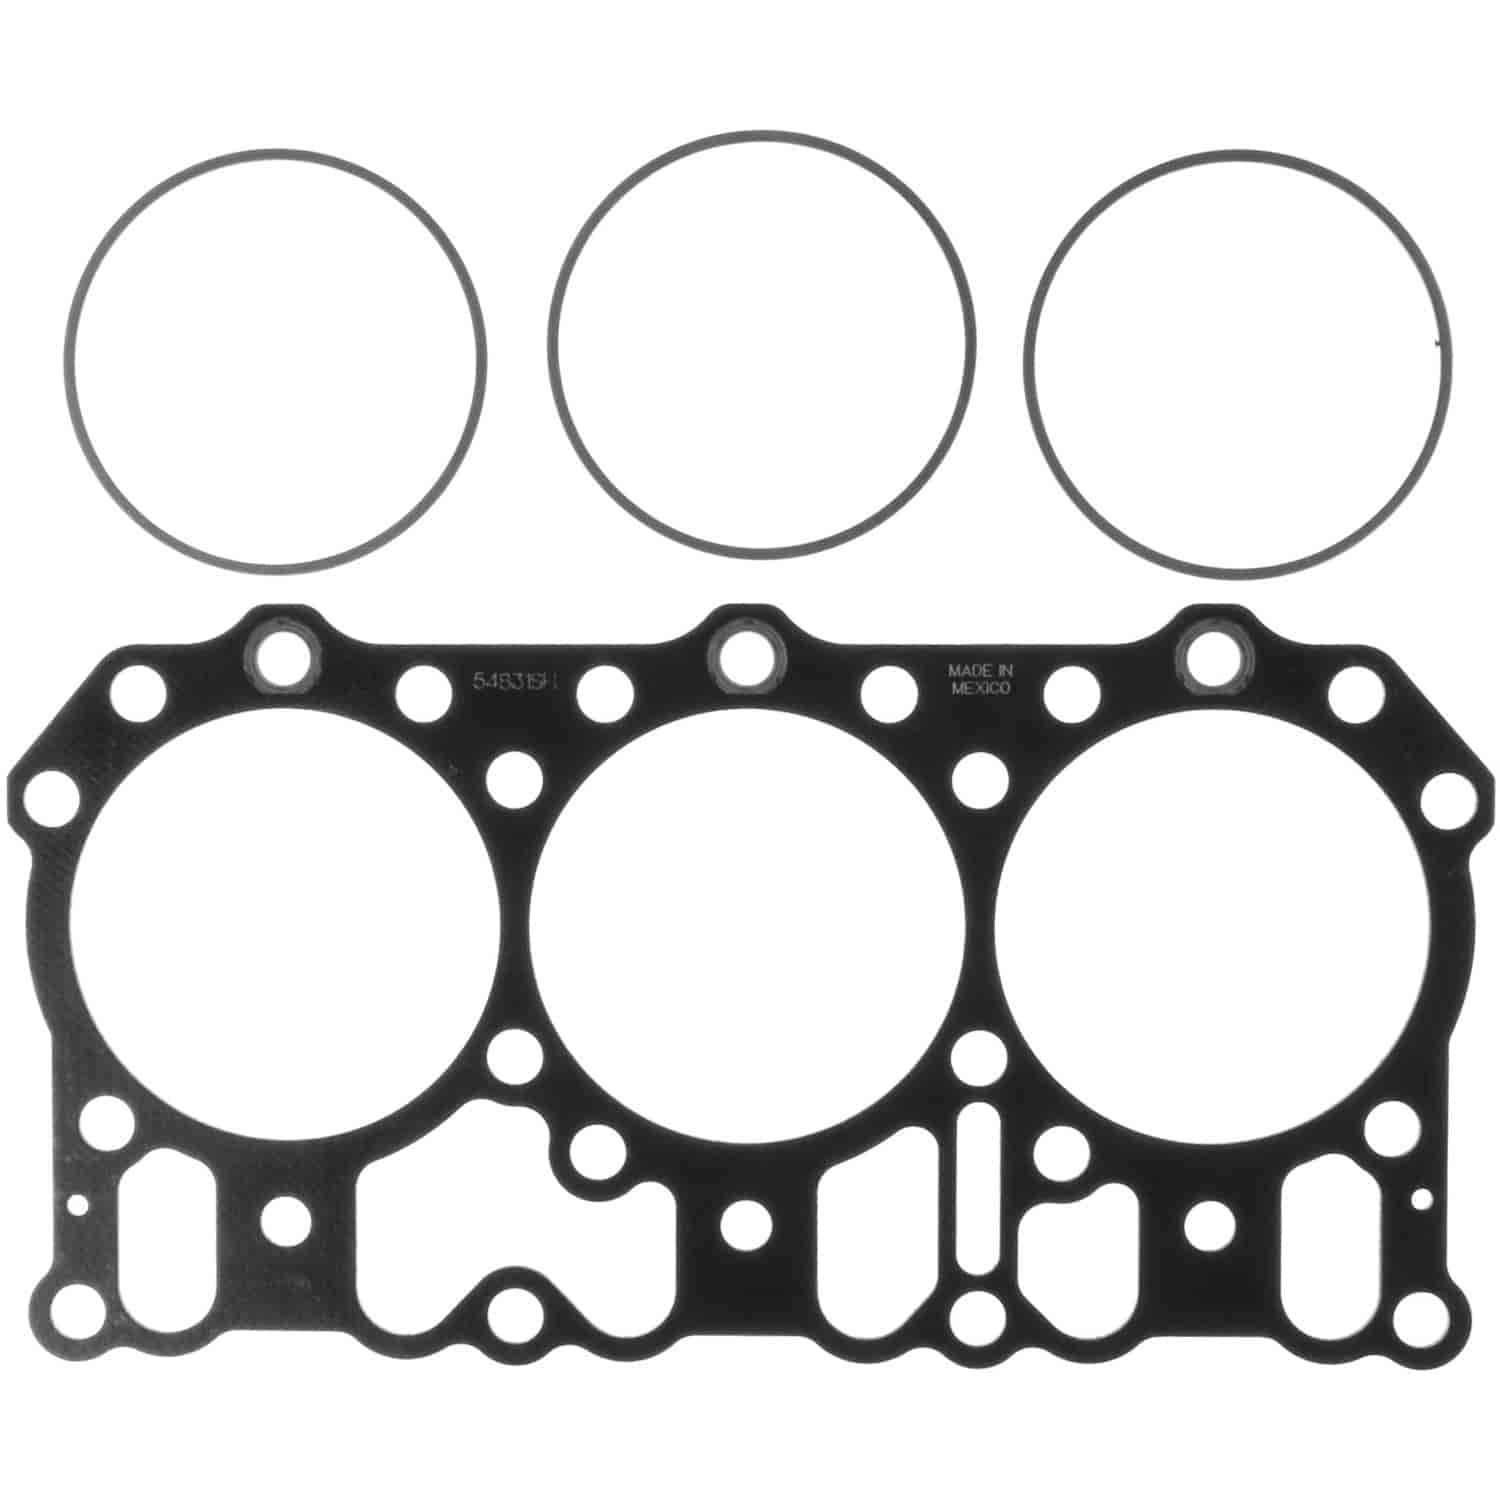 Cylinder Head Gasket Mack E7 Engines Late Model with Flat Fire Rings